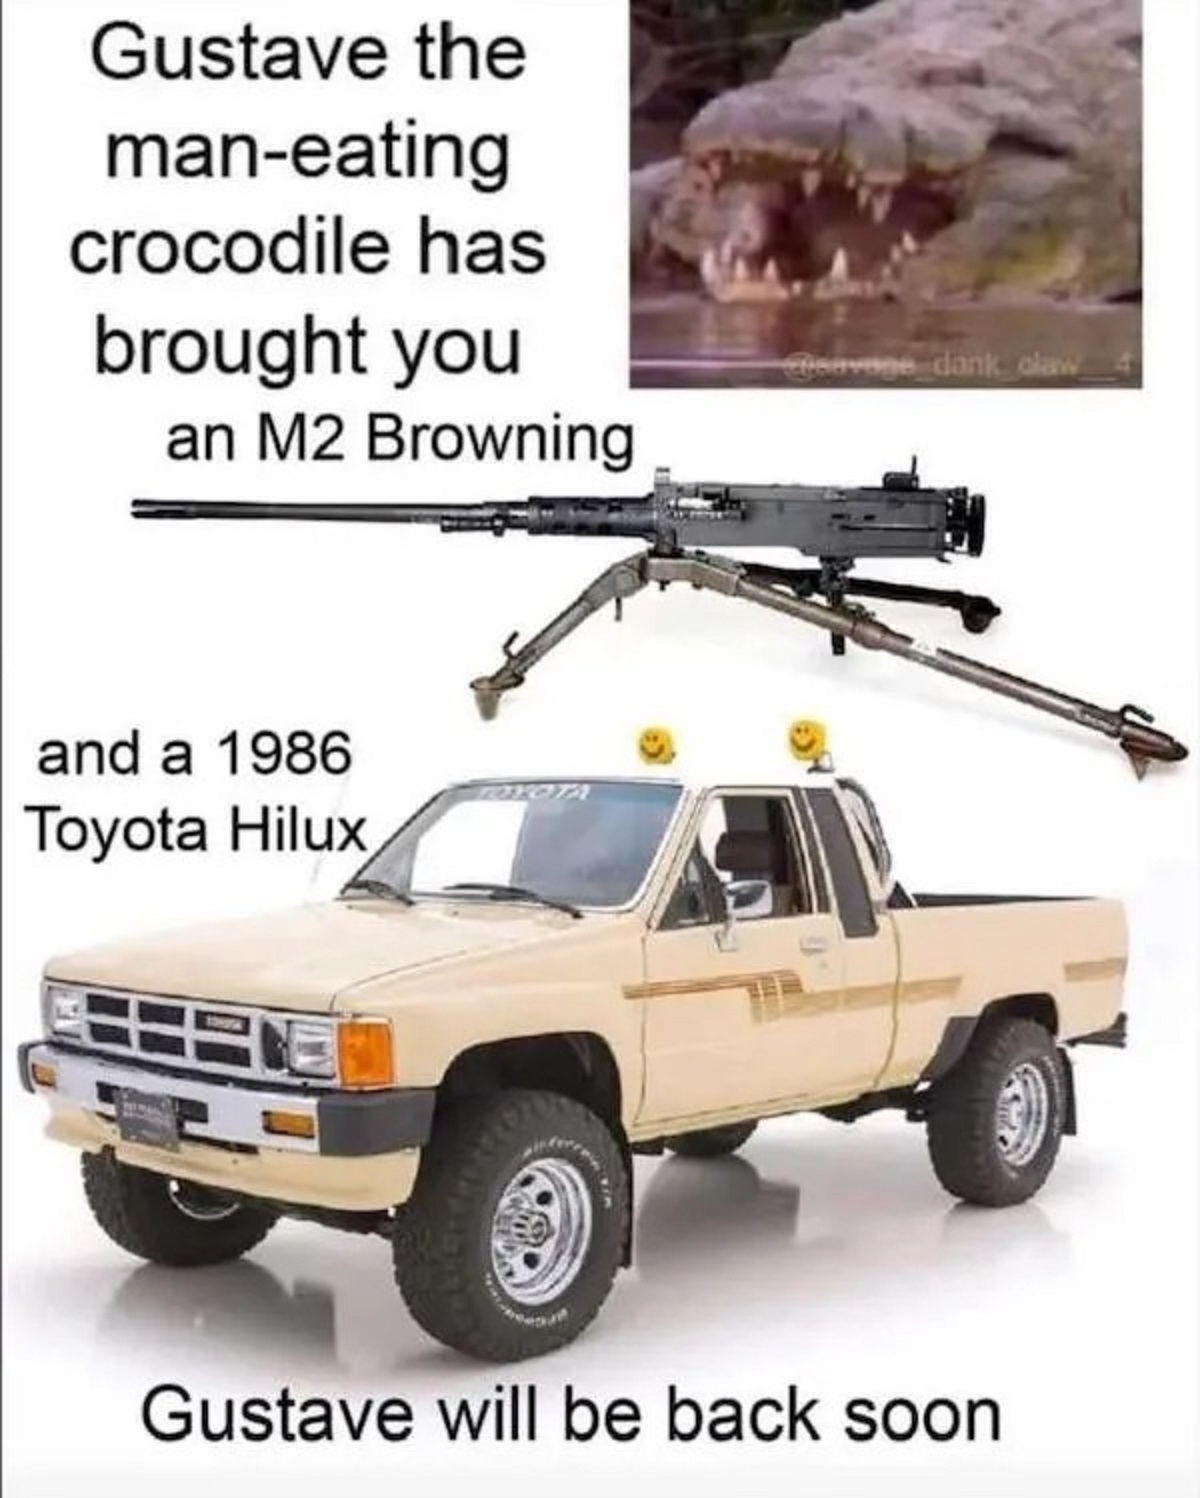 vintage hilux - Gustave the maneating crocodile has brought you an M2 Browning and a 1986 Toyota Hilux Toyota dank claw Gustave will be back soon